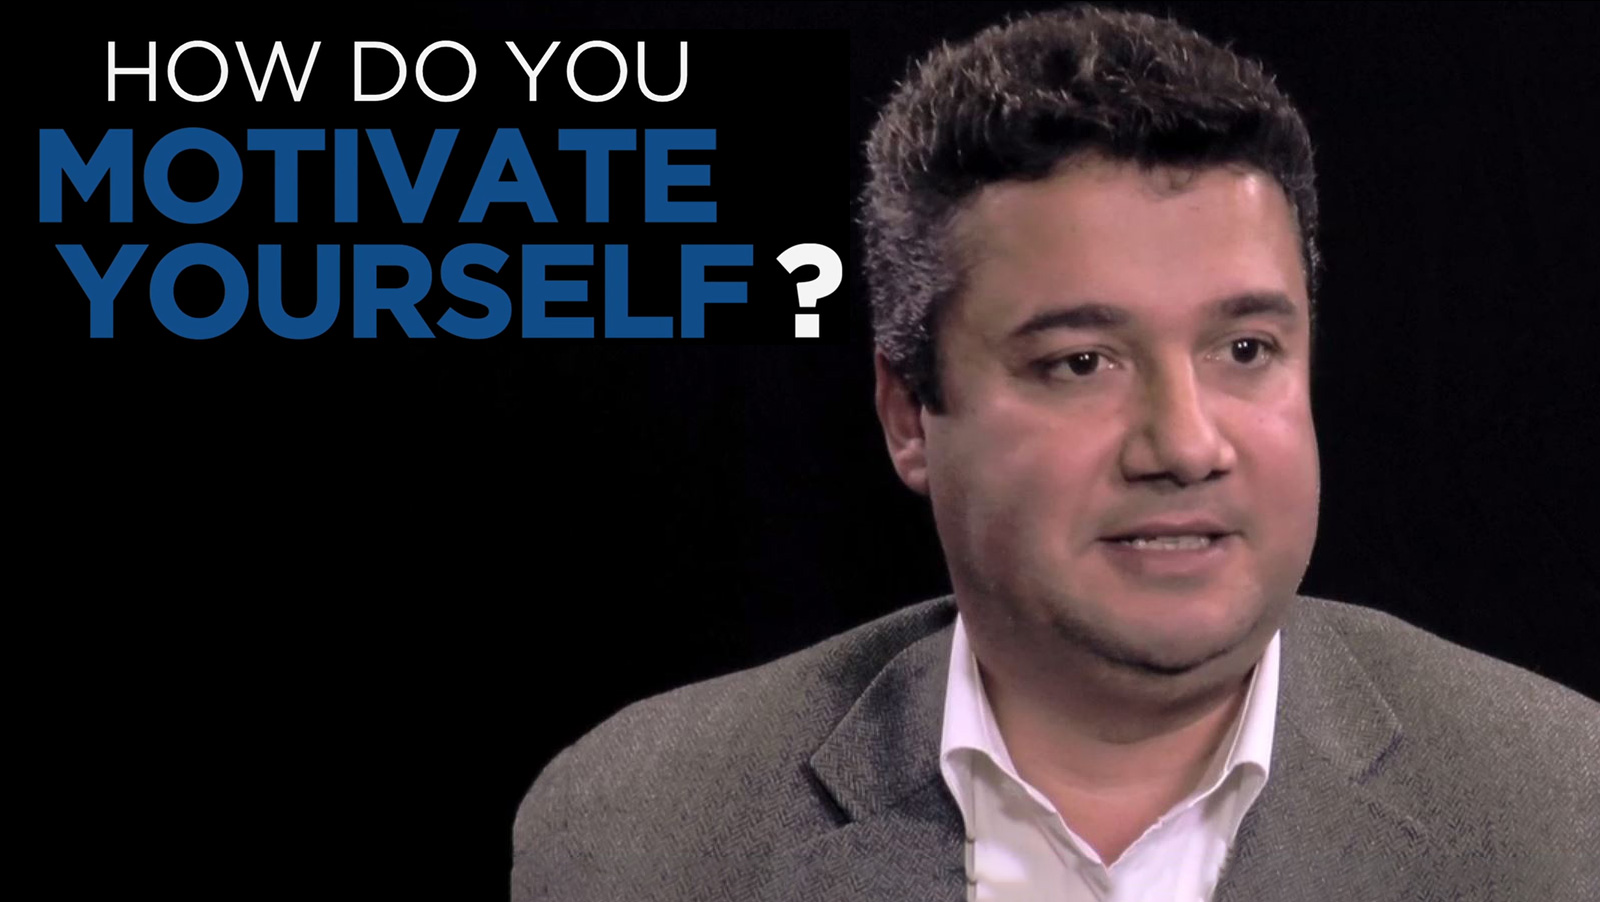 Hussein Chahine: Shared Experience - How do you motivate yourself?